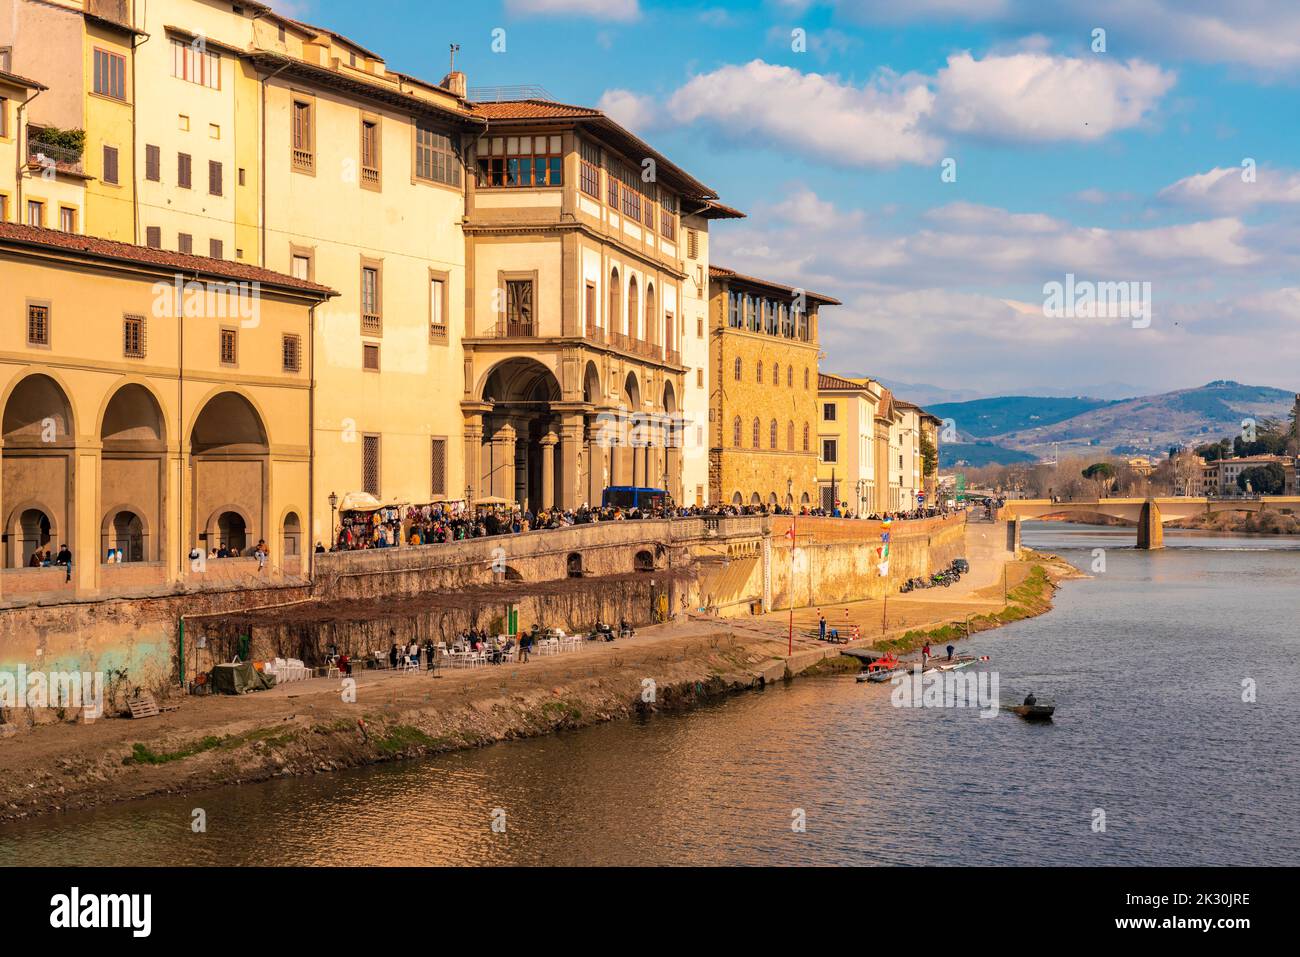 Italy, Tuscany, Florence, Crowd of people along Arno River  promenade Stock Photo